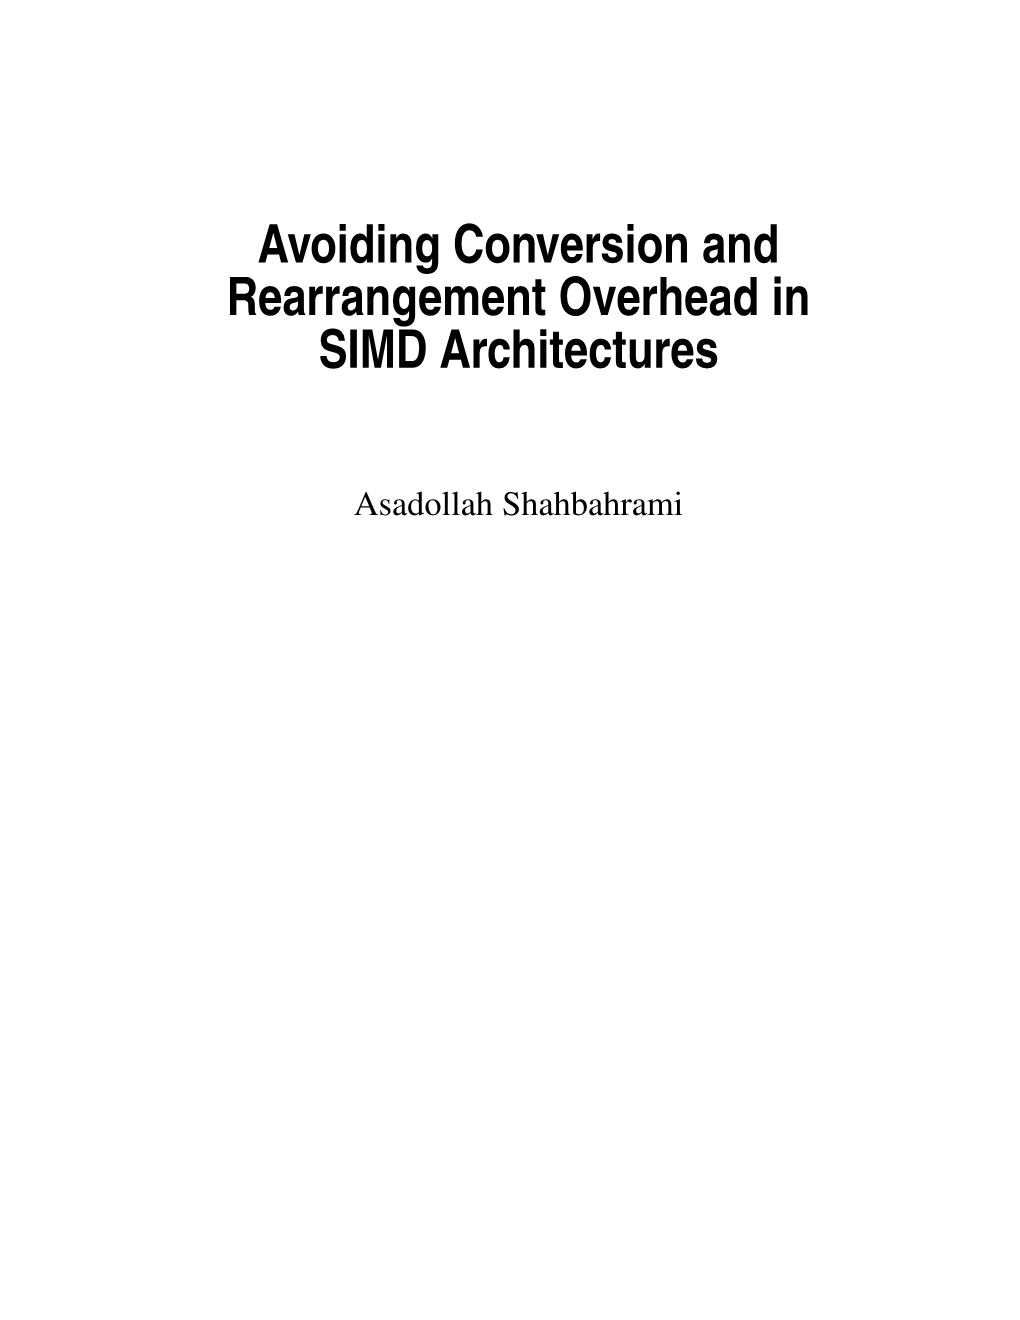 Avoiding Conversion and Rearrangement Overhead in SIMD Architectures